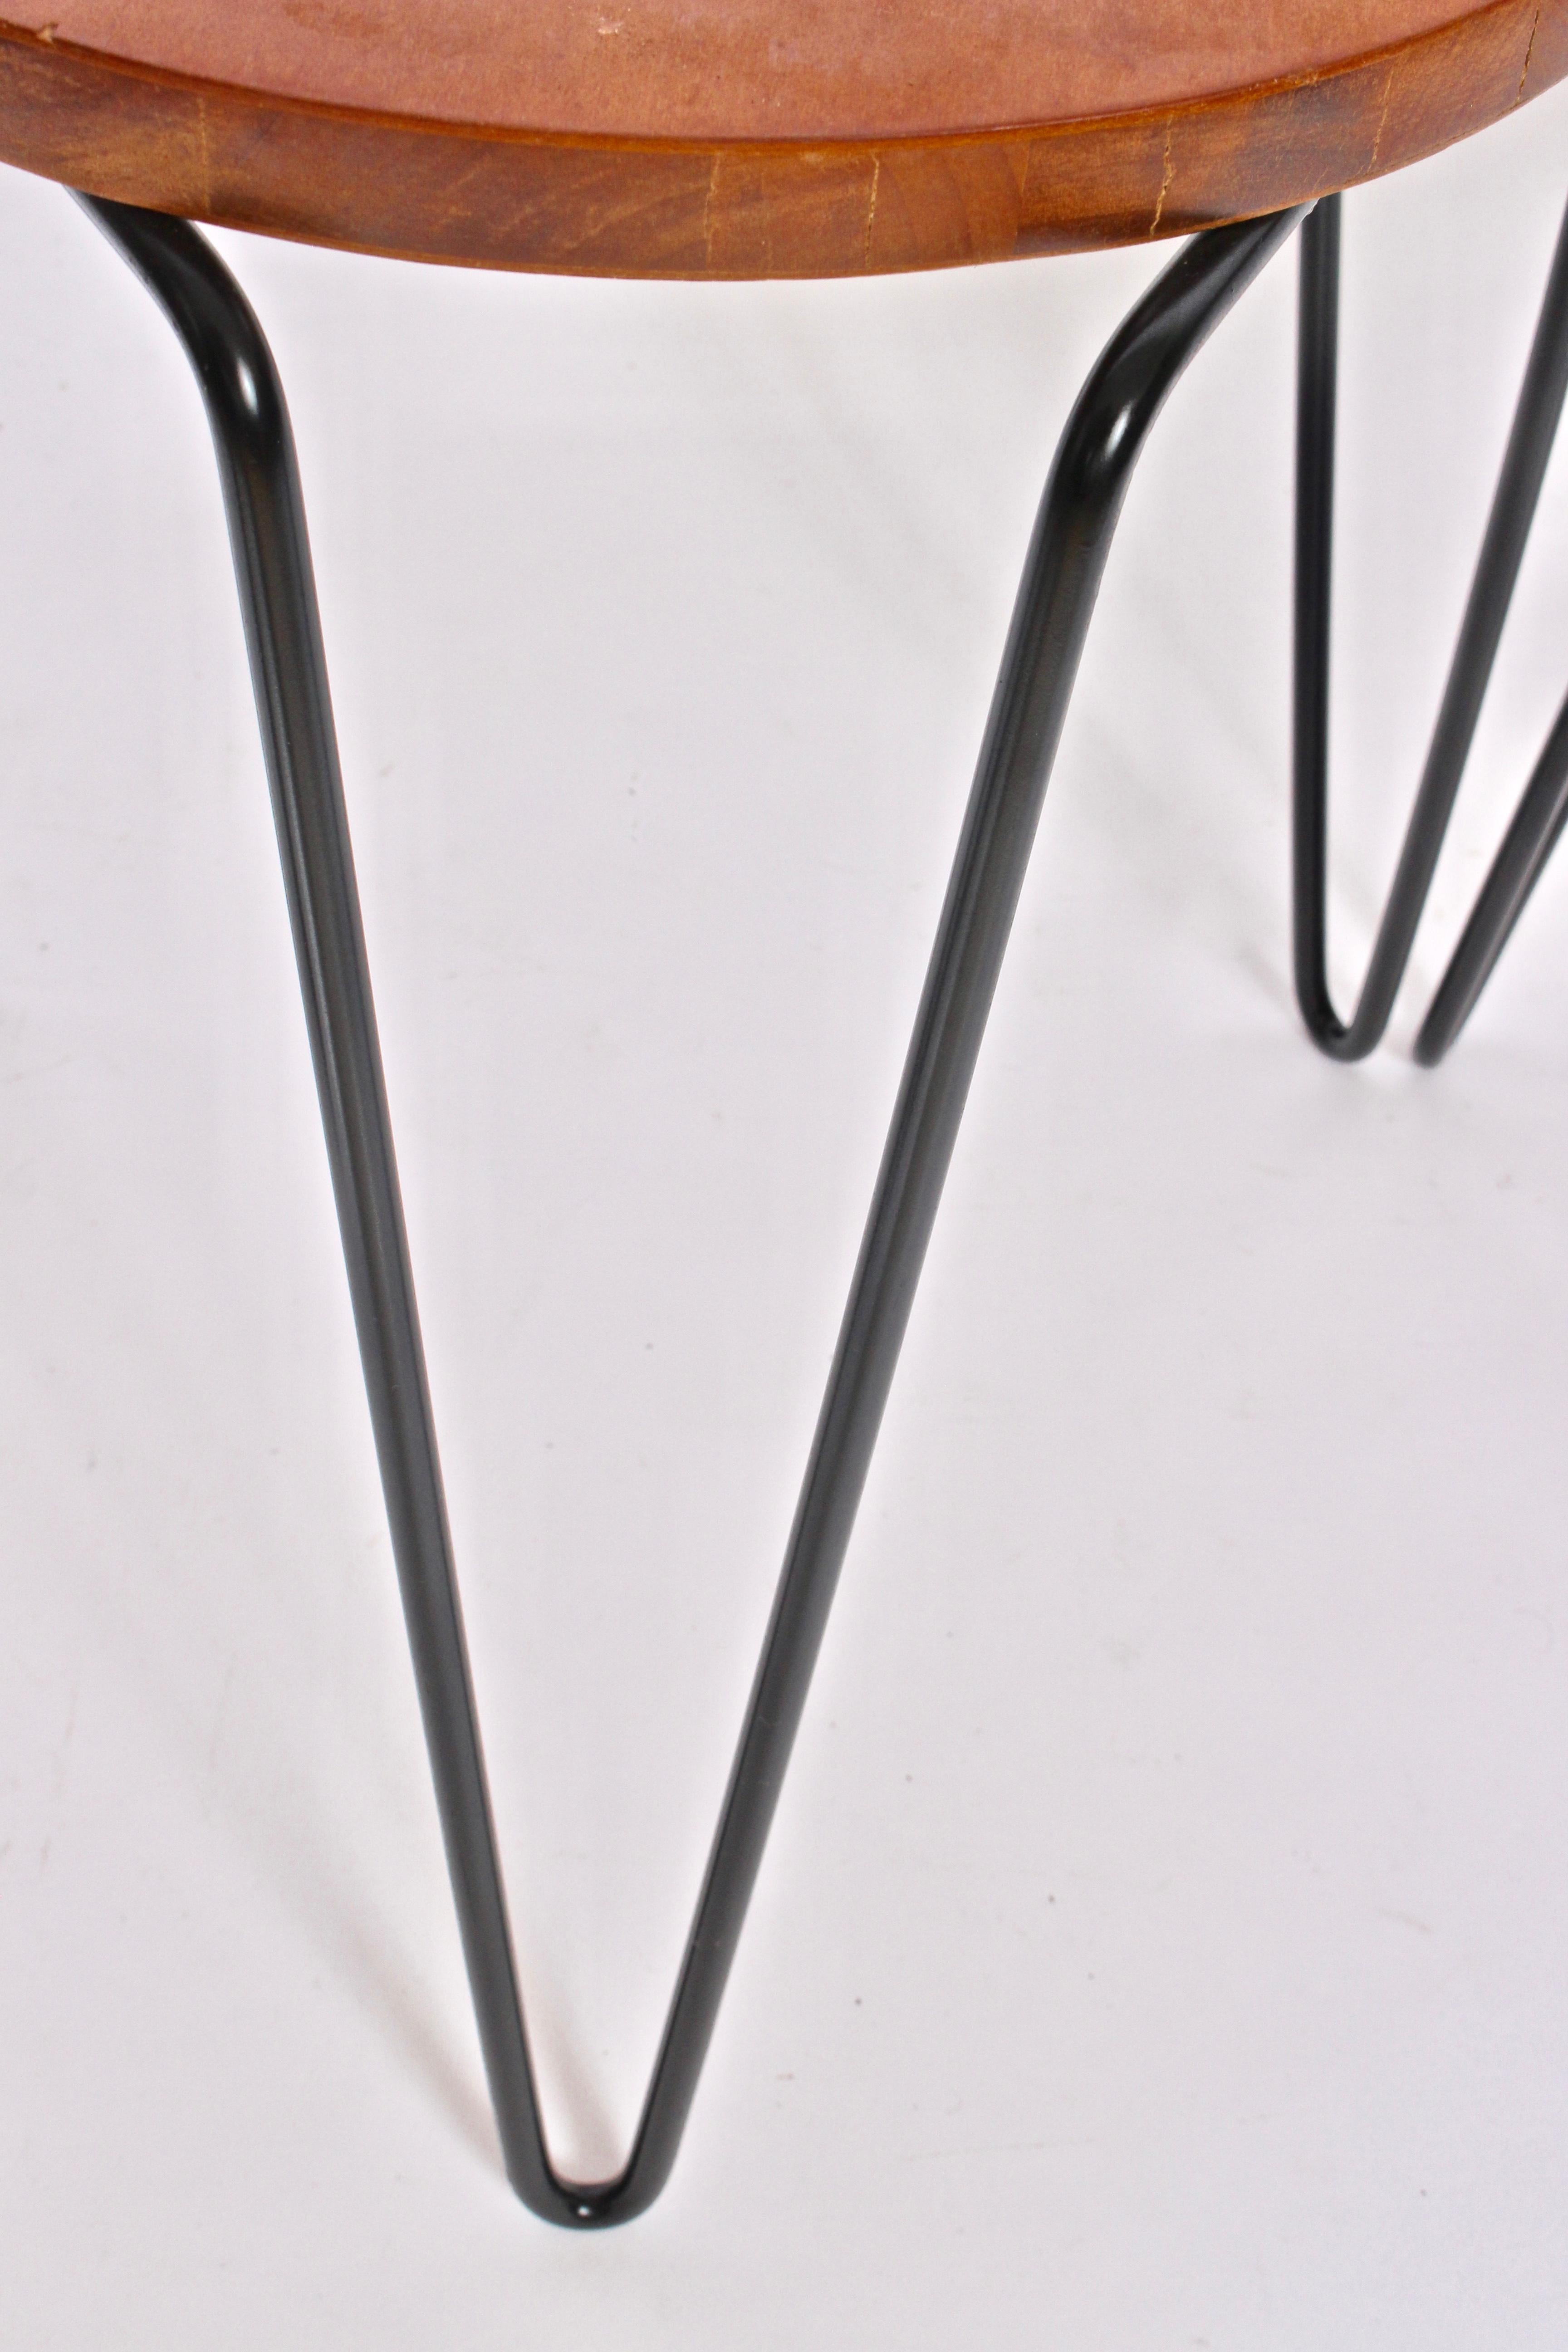 Iron Set of Three Florence Knoll Model 75 Stacking Stools, 1940's